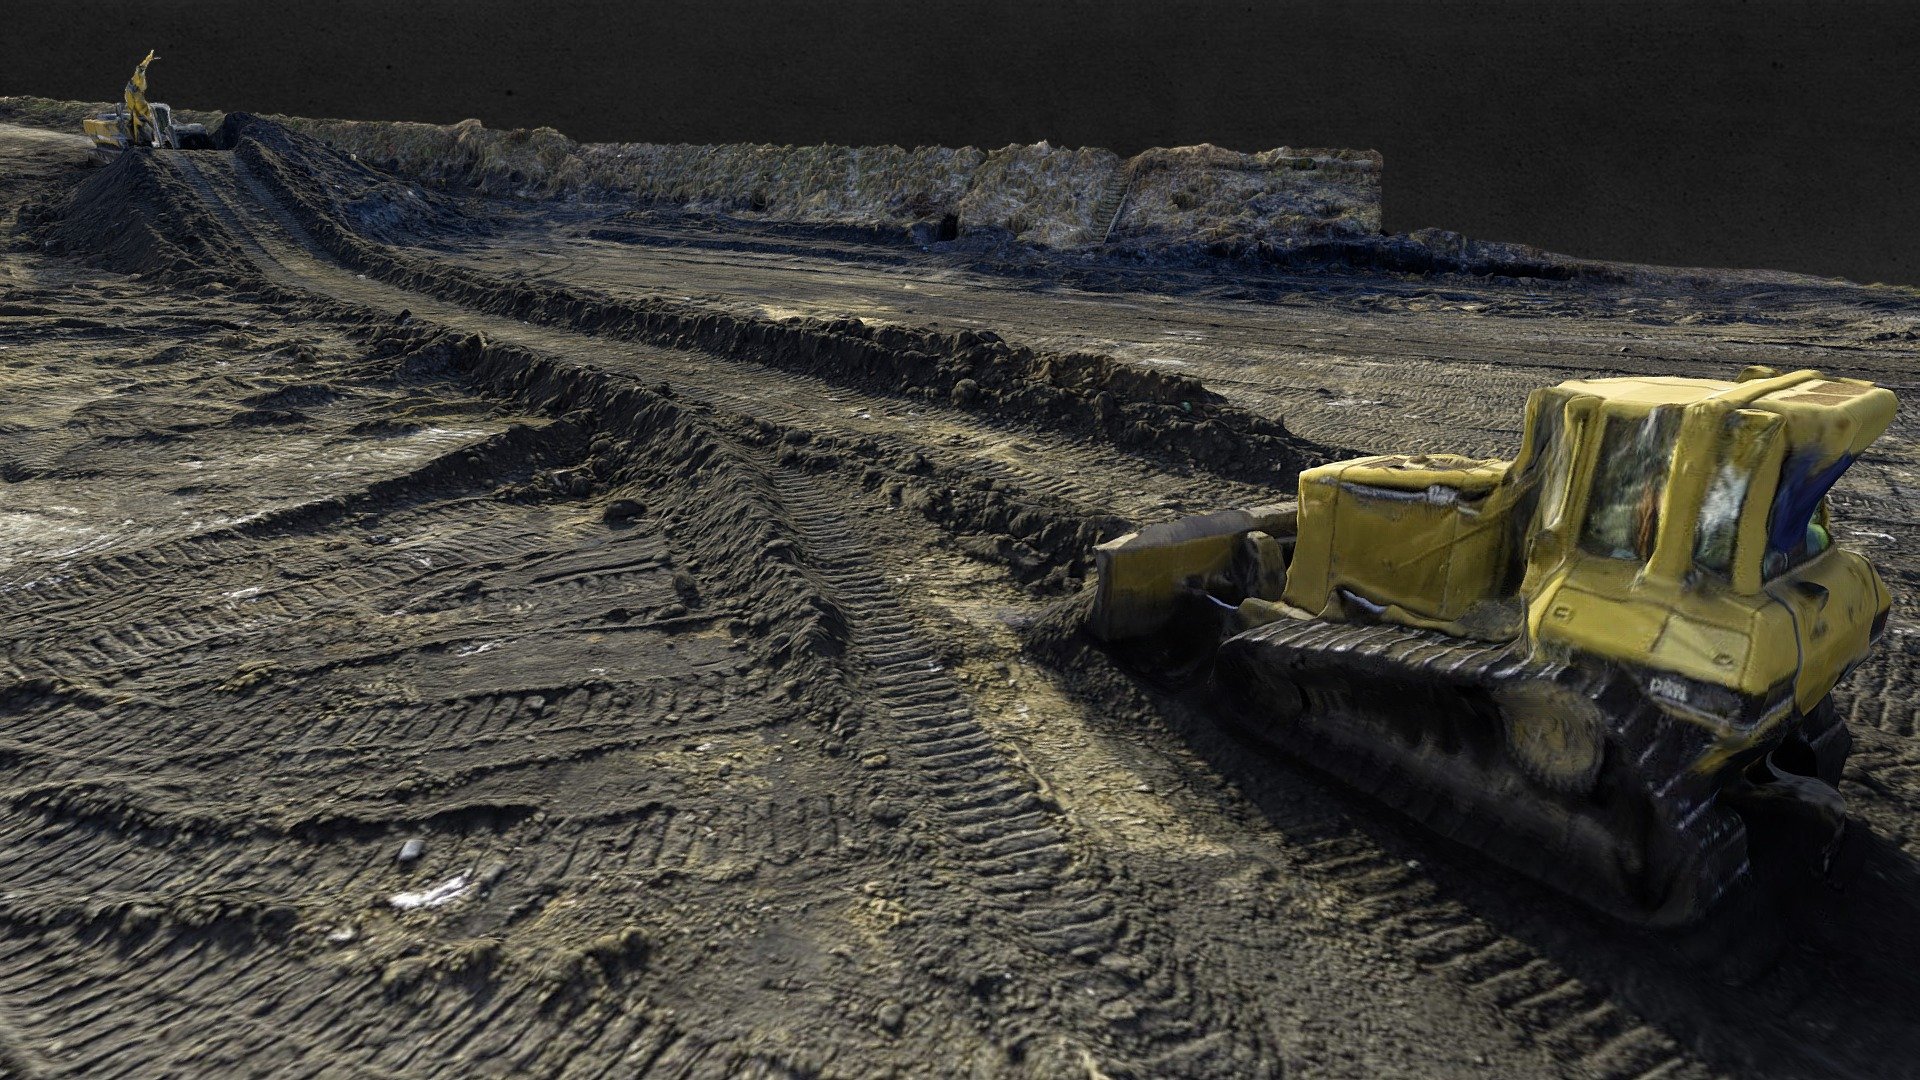 Construction dig site with dark ground. 

Model 3D created in RealityCapture from 615 images (dji mini 3 pro)

Download version: Format: OBJ Triangles: 1mln Textures: 2 x 8192x8192 u1v1 32-bit BGRA Textures format: png

If you like my work leave a like or comment and follow me for more! Thanks :) - Construction dig site - dark ground - Buy Royalty Free 3D model by archiwum_xyz 3d model